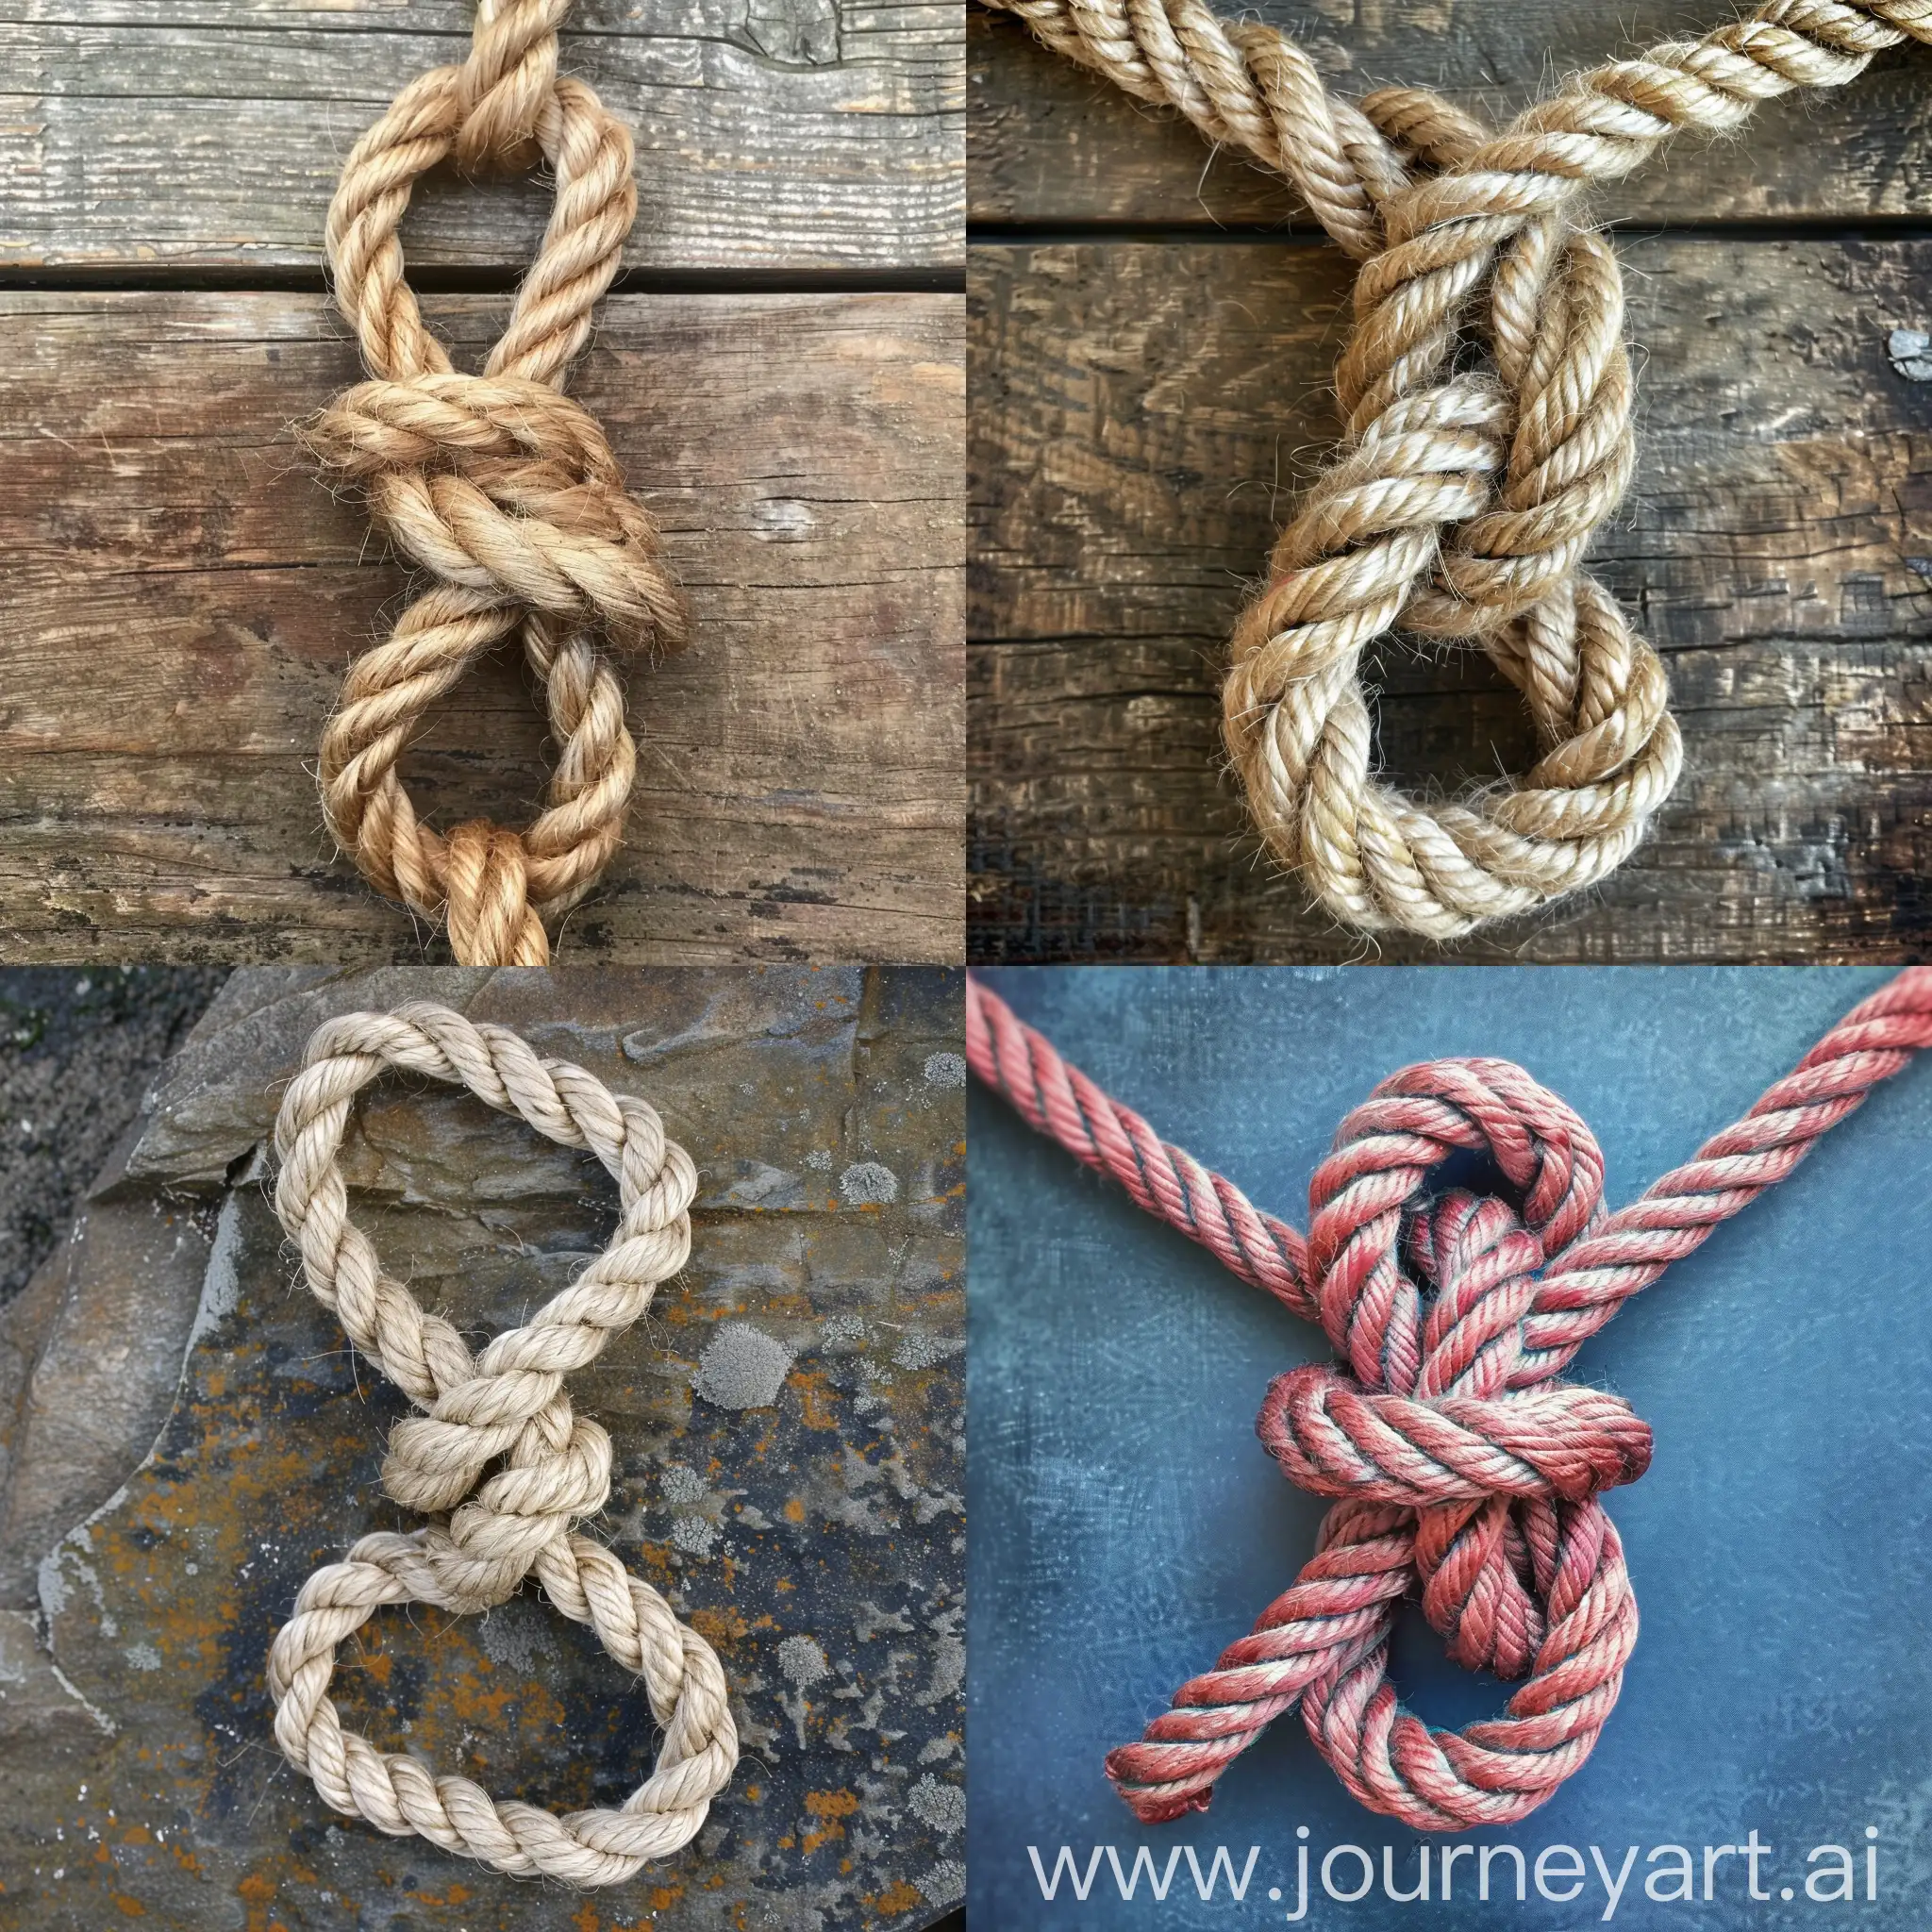 Detailed-Illustration-of-a-Bowline-Knot-Tying-Technique